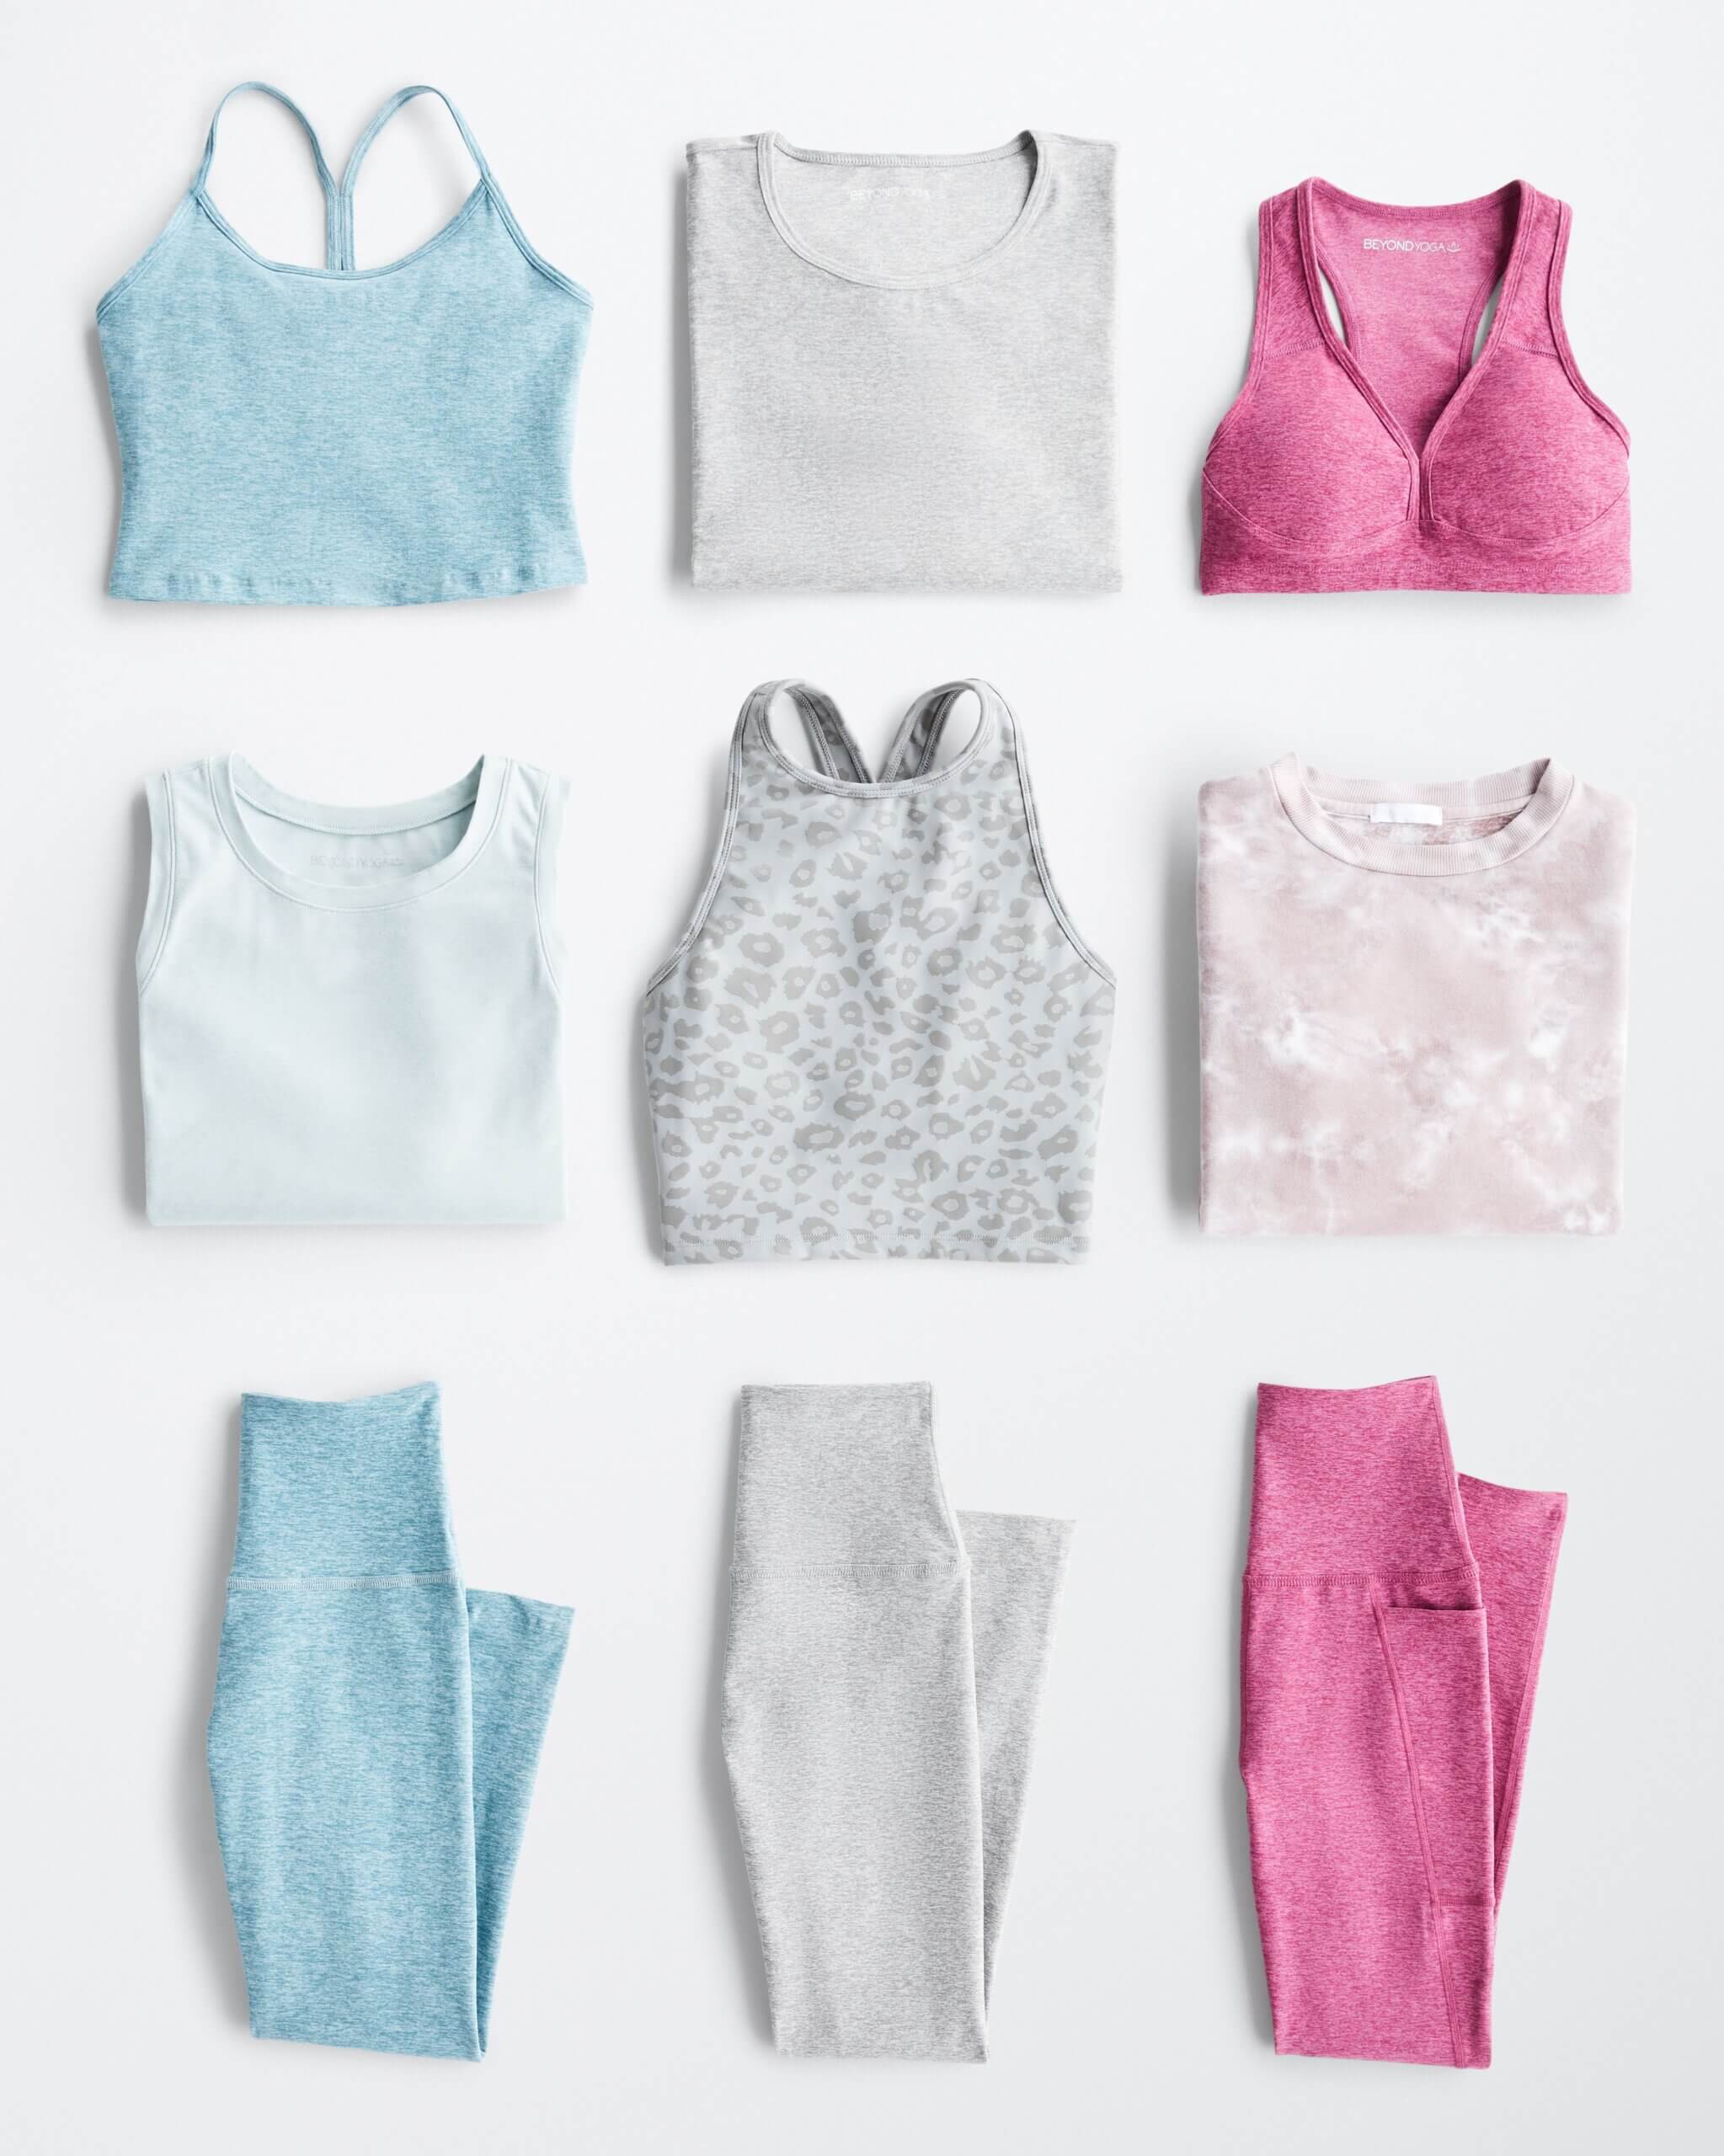 Stitch Fix Women's outfit laydown featuring sports bras, athletic tops and leggings in shades of blue, light grey and pink. 